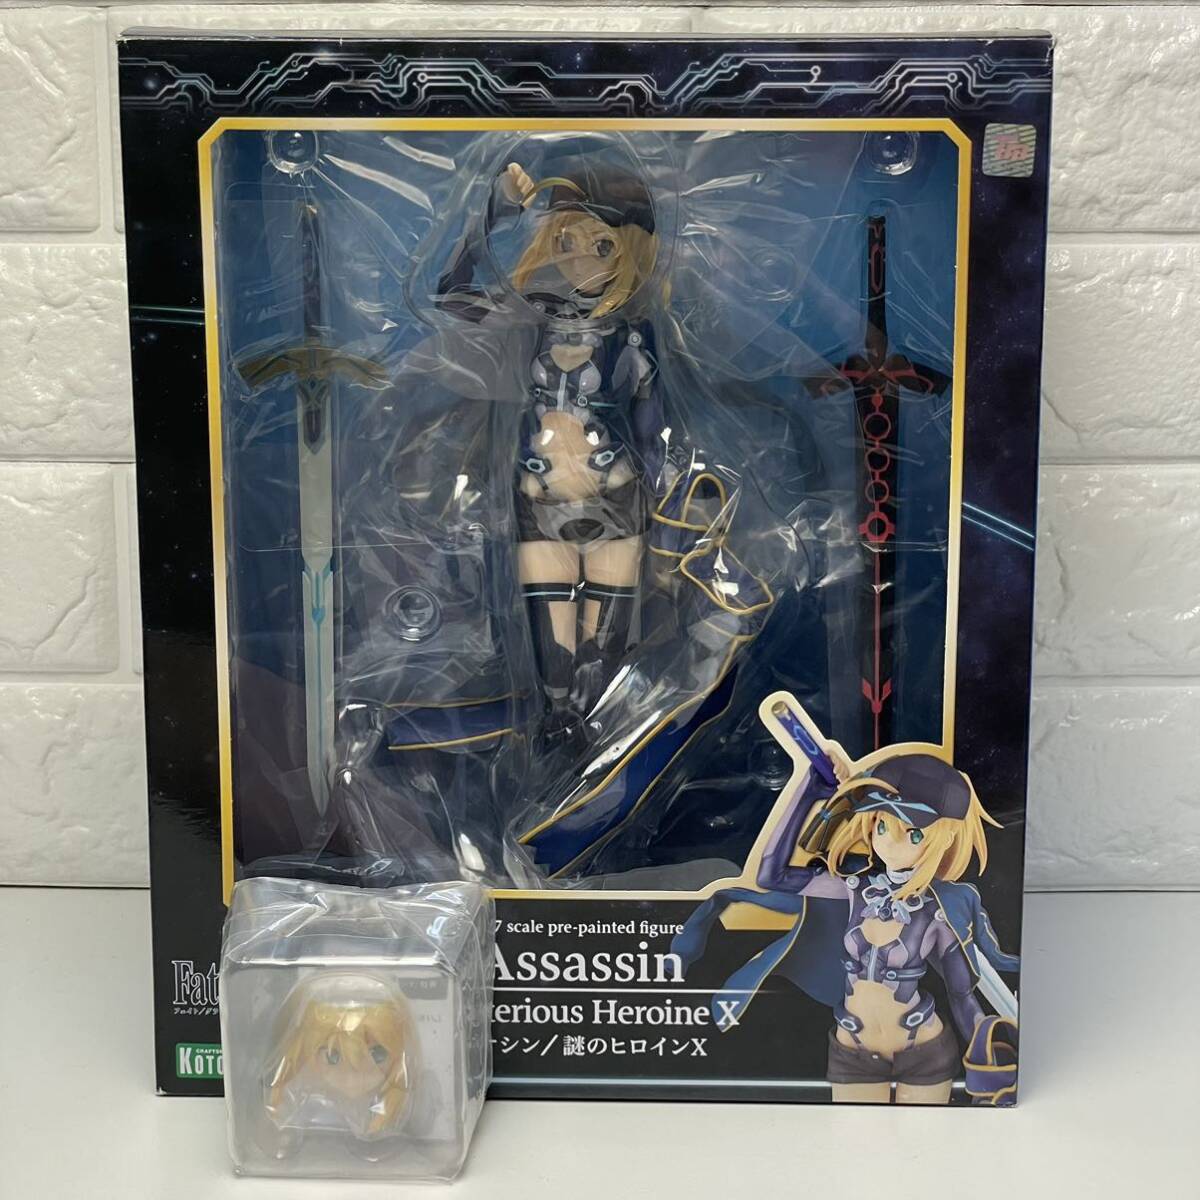 1 jpy ~ [ breaking the seal ] Fate/Grand Orderasasin/ mystery. heroine X laughing face parts attaching 1/7 scale figure . shop Kotobukiya domestic regular goods 